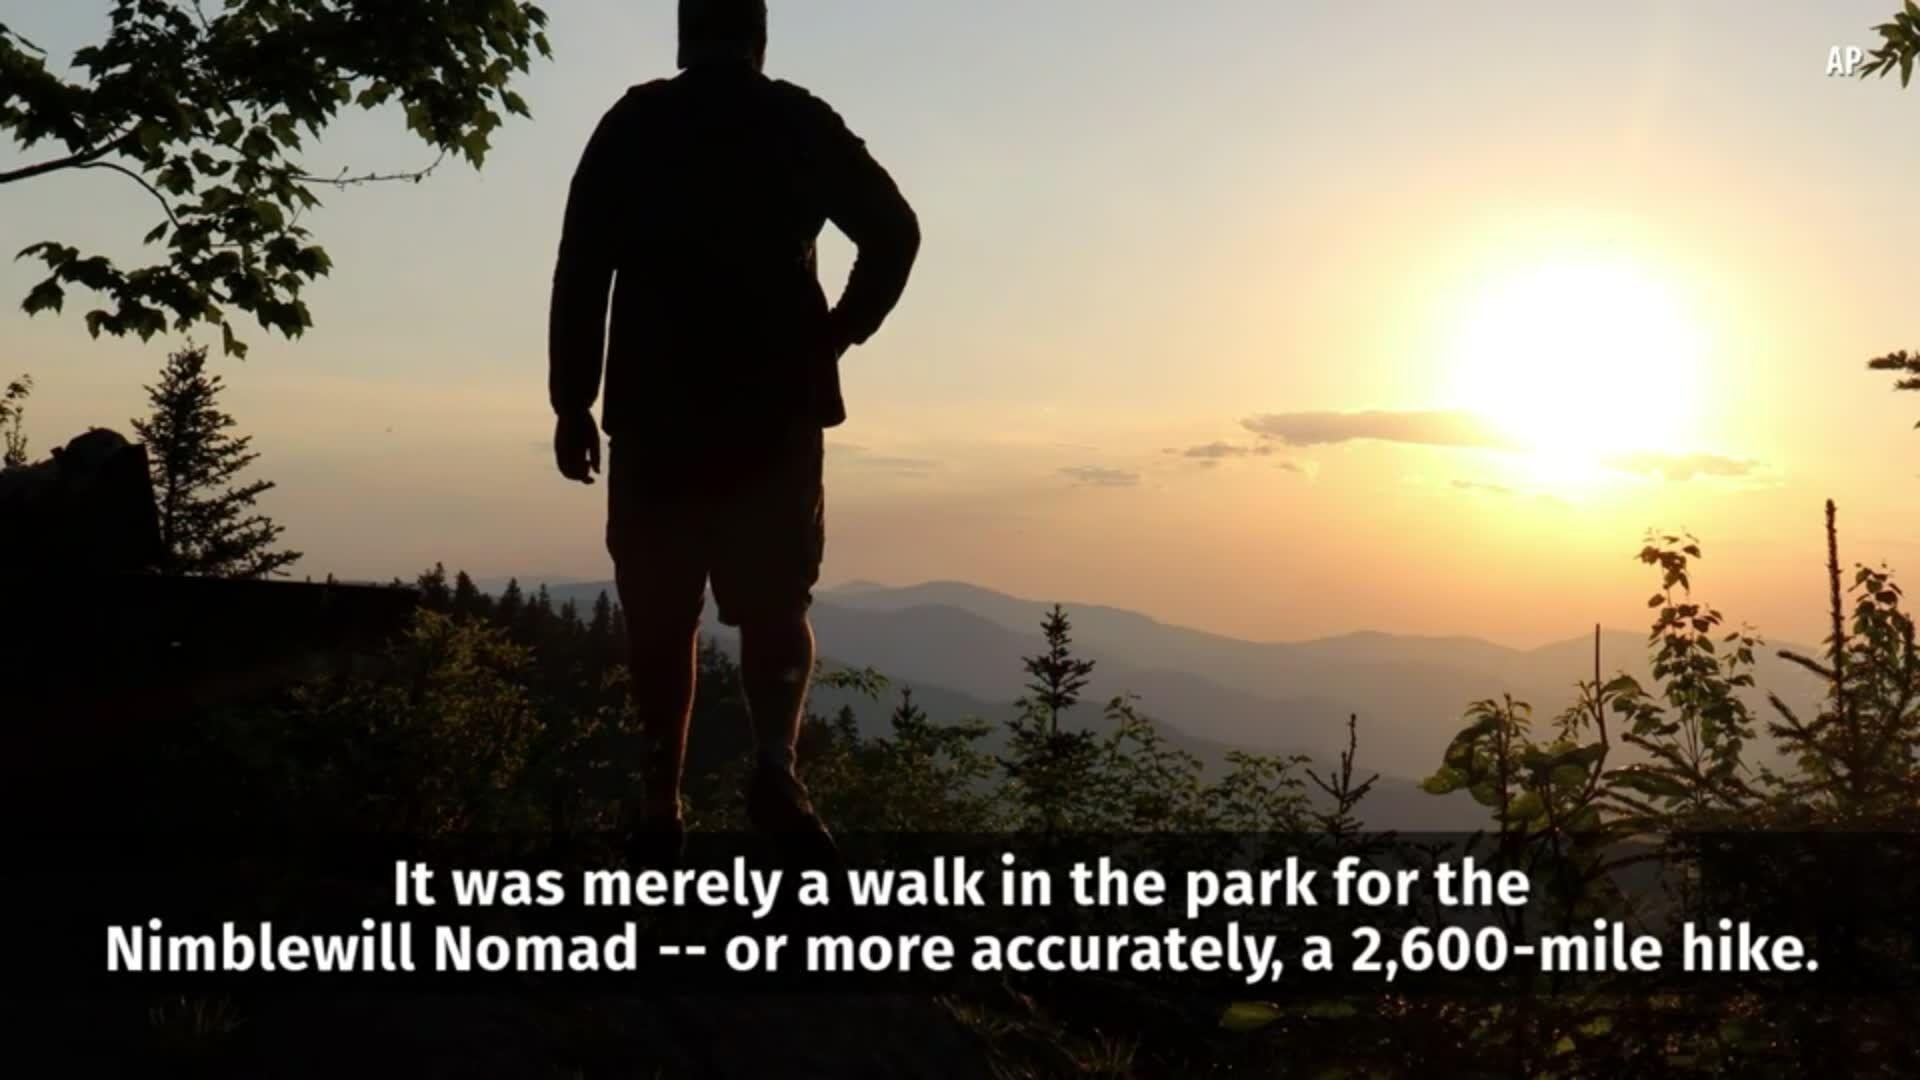 Nimblewill Nomad' Becomes the Oldest Person to Hike the